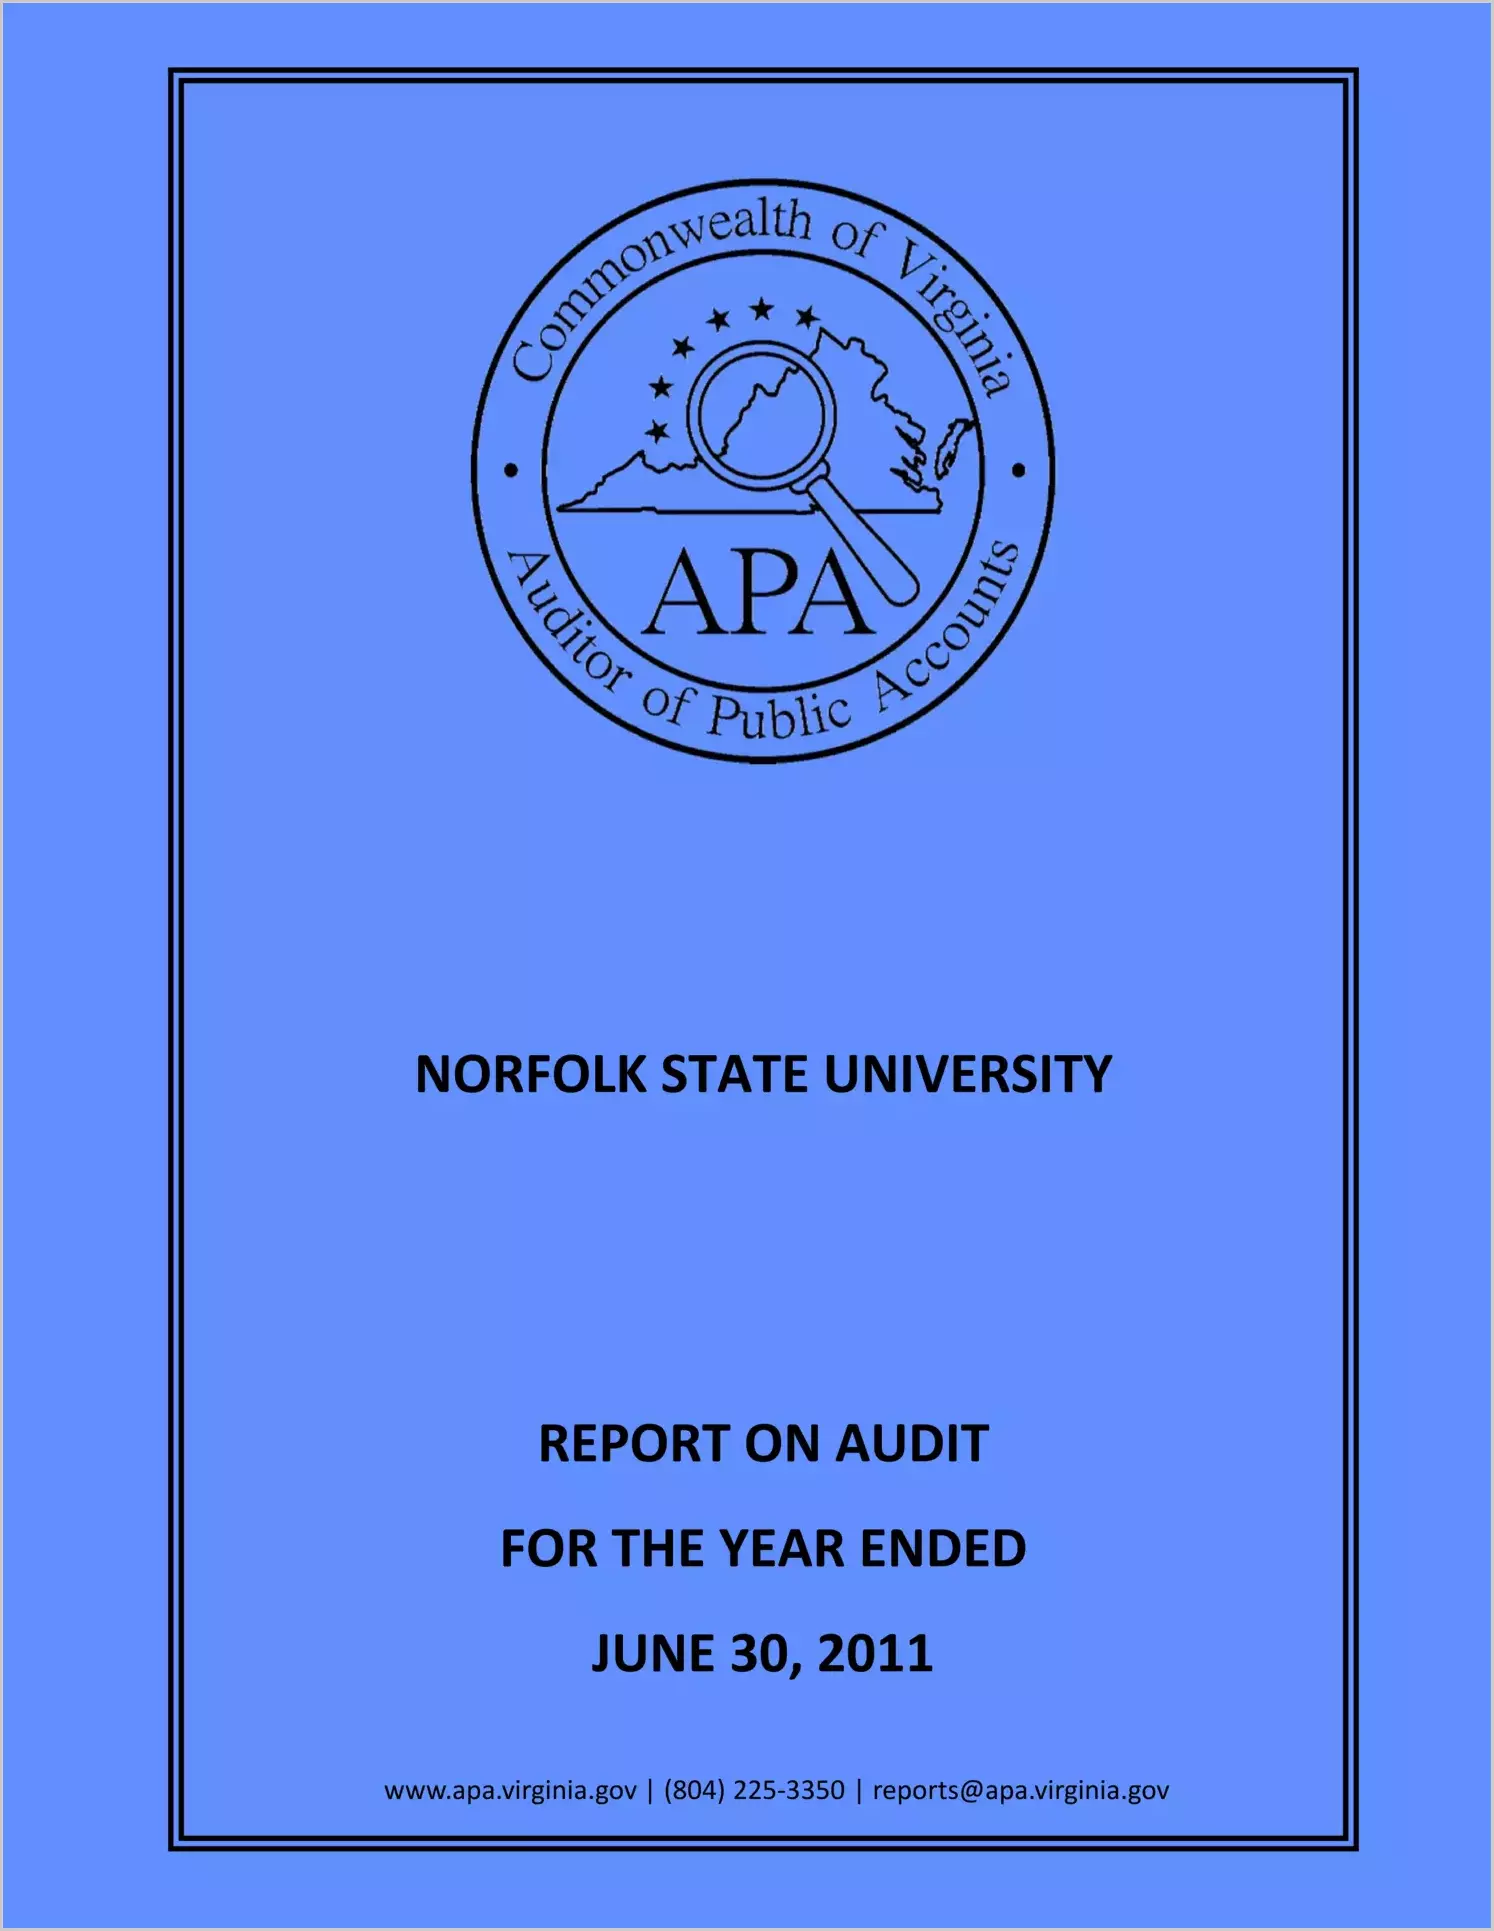 Norfolk State University report on audit for the year ended June 30, 2011